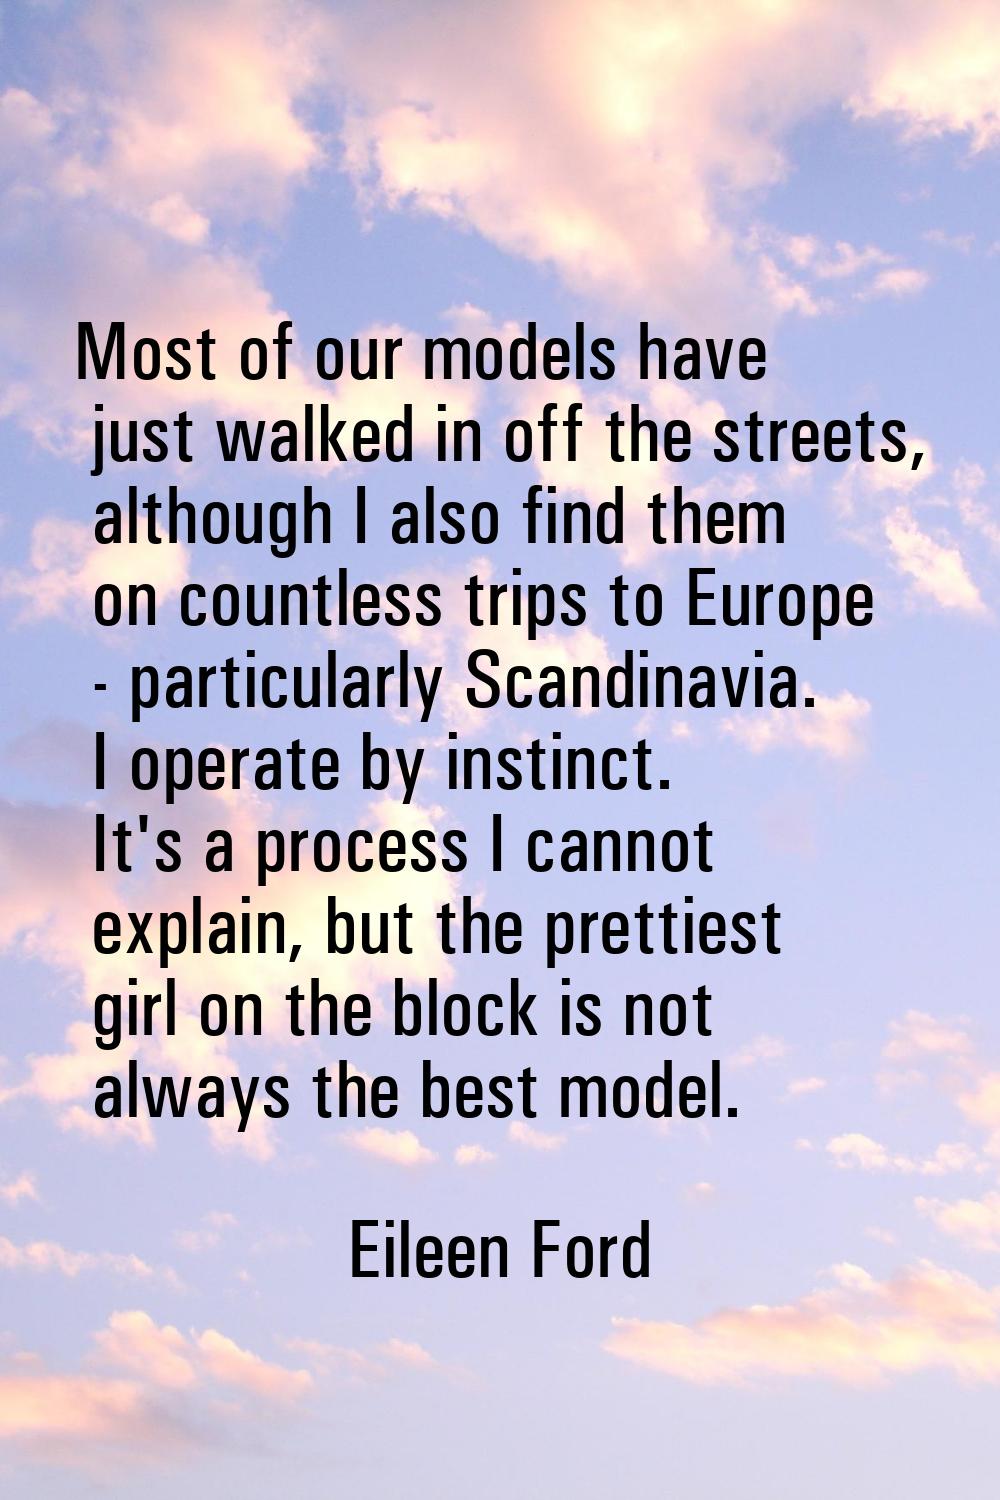 Most of our models have just walked in off the streets, although I also find them on countless trip